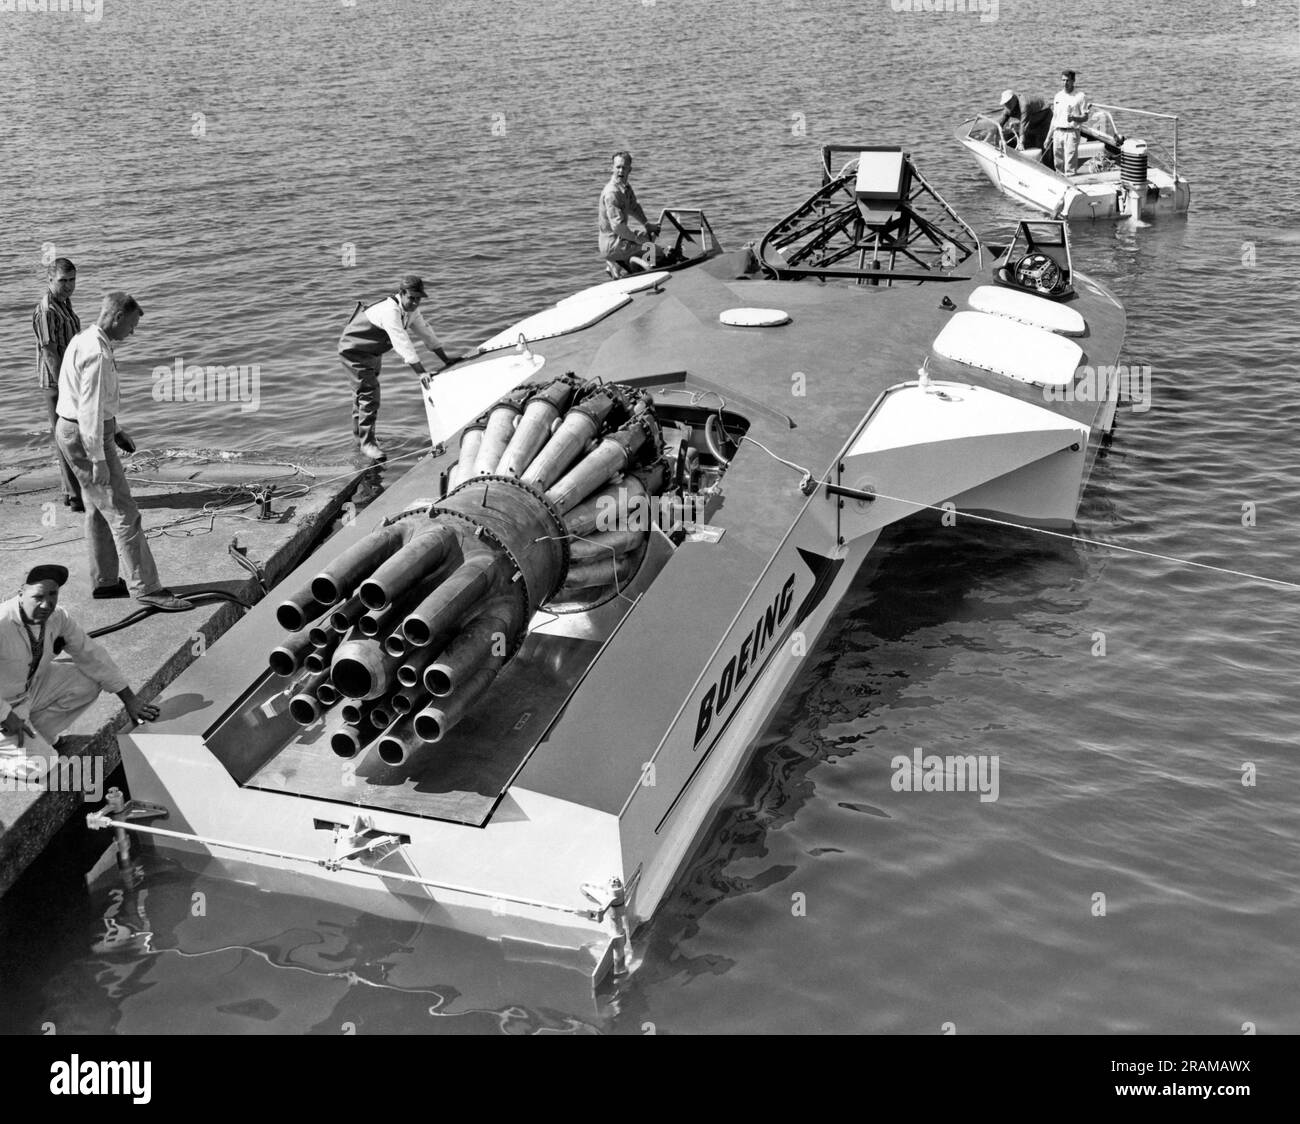 Seattle, Washington:  c. 1961. The Aqua-Jet on Lake Washington, a jet engine powered experimental speed boat made by Boeing. It is 38 feet long with a 17 foot beam, can reach speeds of 100 knots (115 mph), and is powered by an Allison J-3 turbojet with 4600 pounds of thrust. Stock Photo